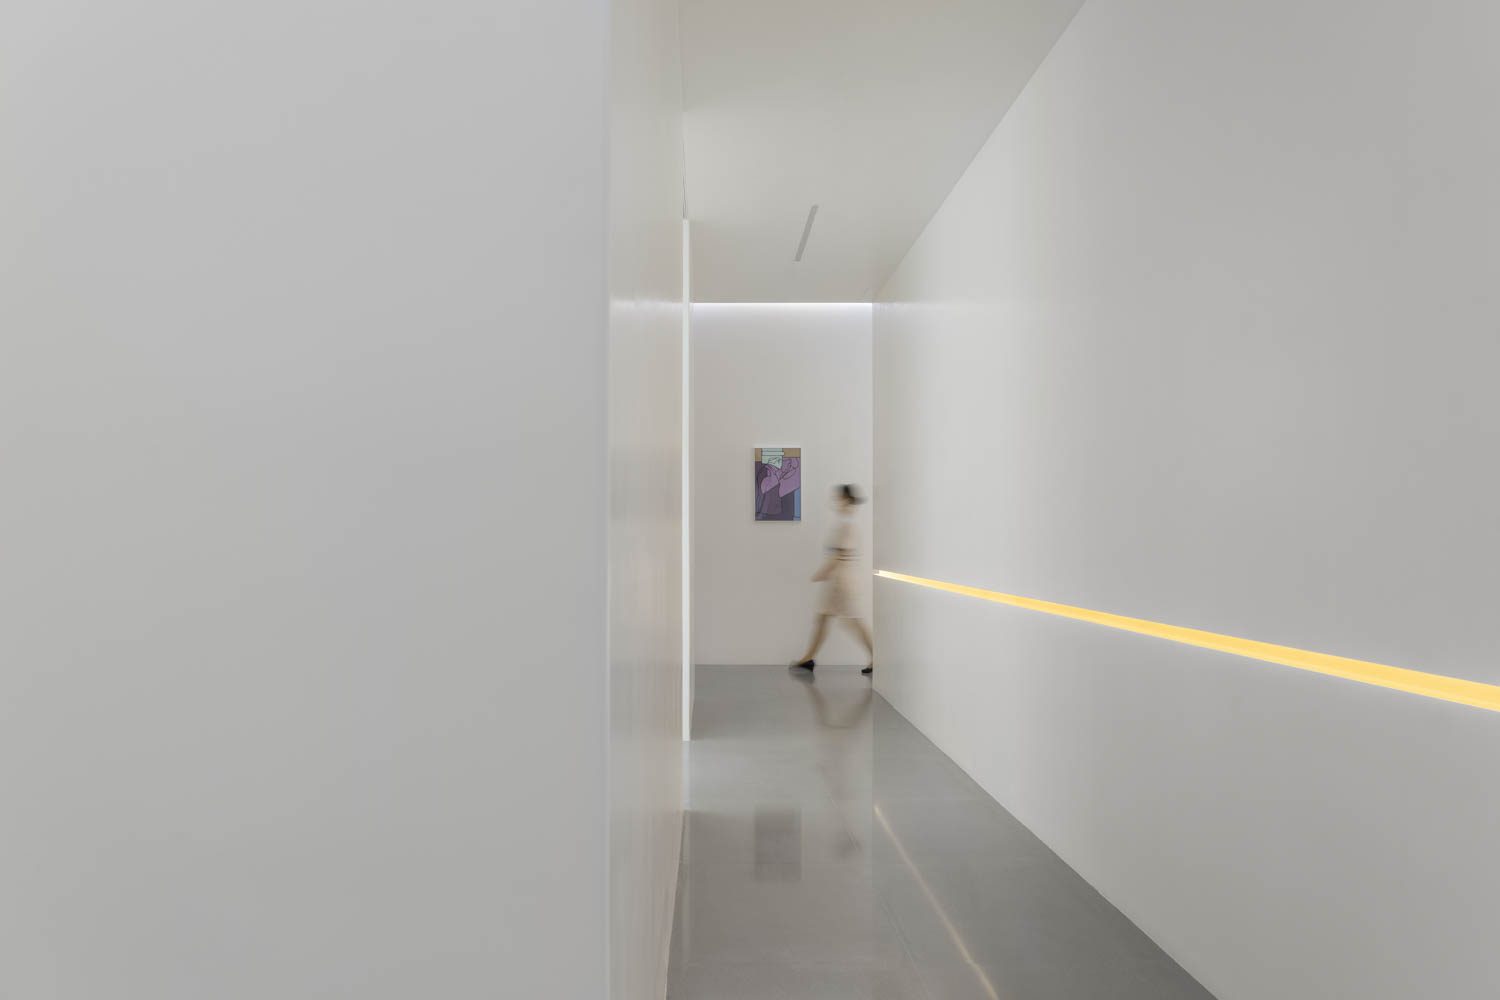 Yellow linear lights, and contemporary art, seem to glow against the resin paint of the passageway walls.